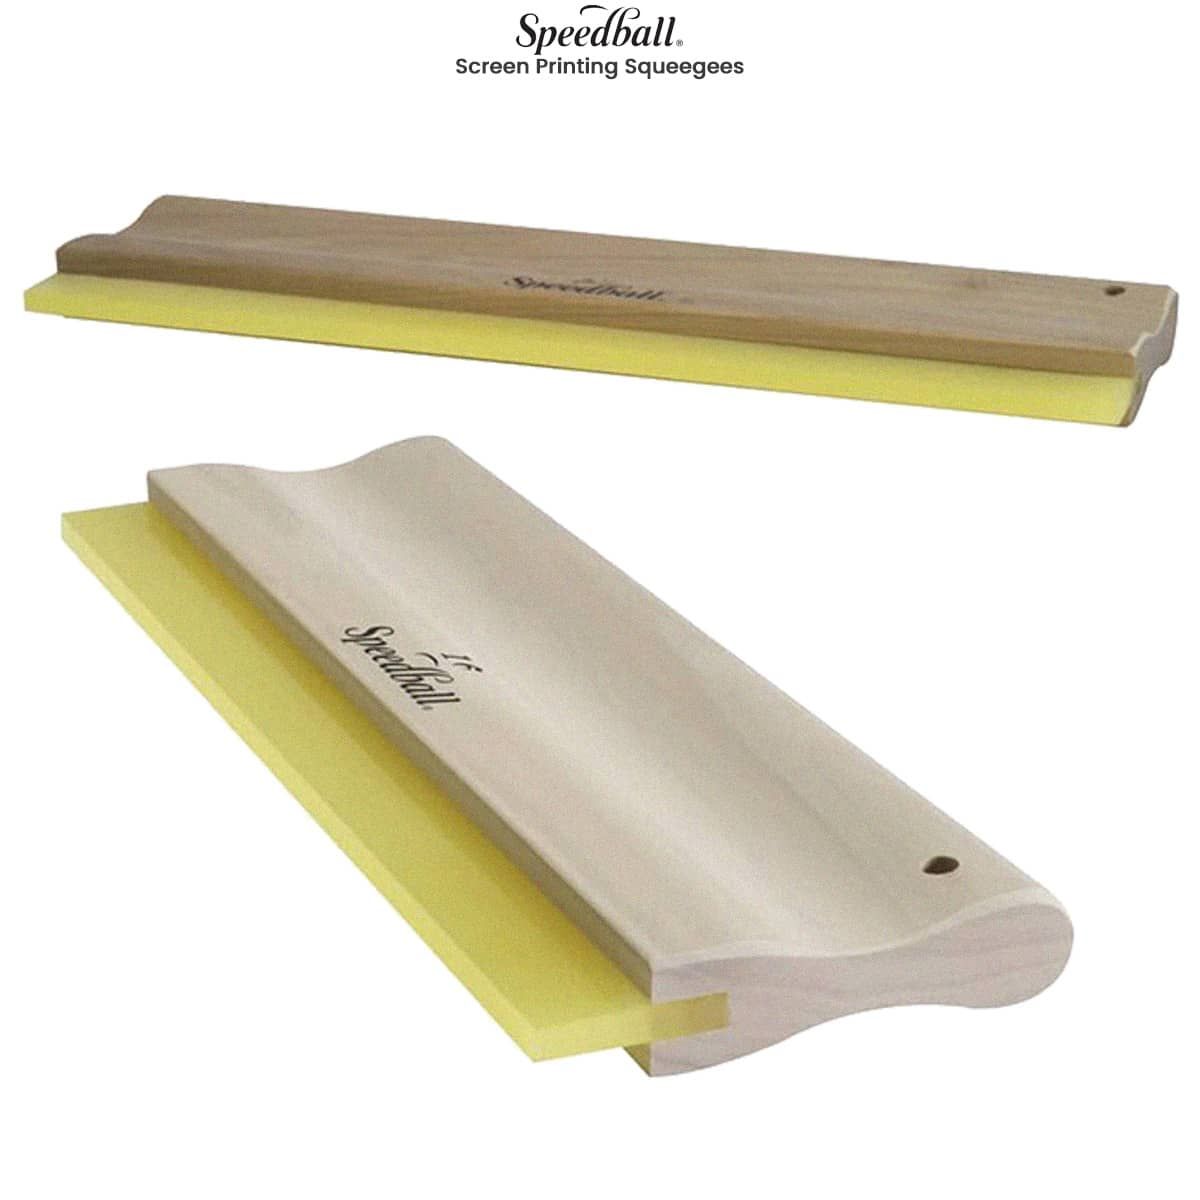 Screen Printing Squeegee: All You Need to Know 